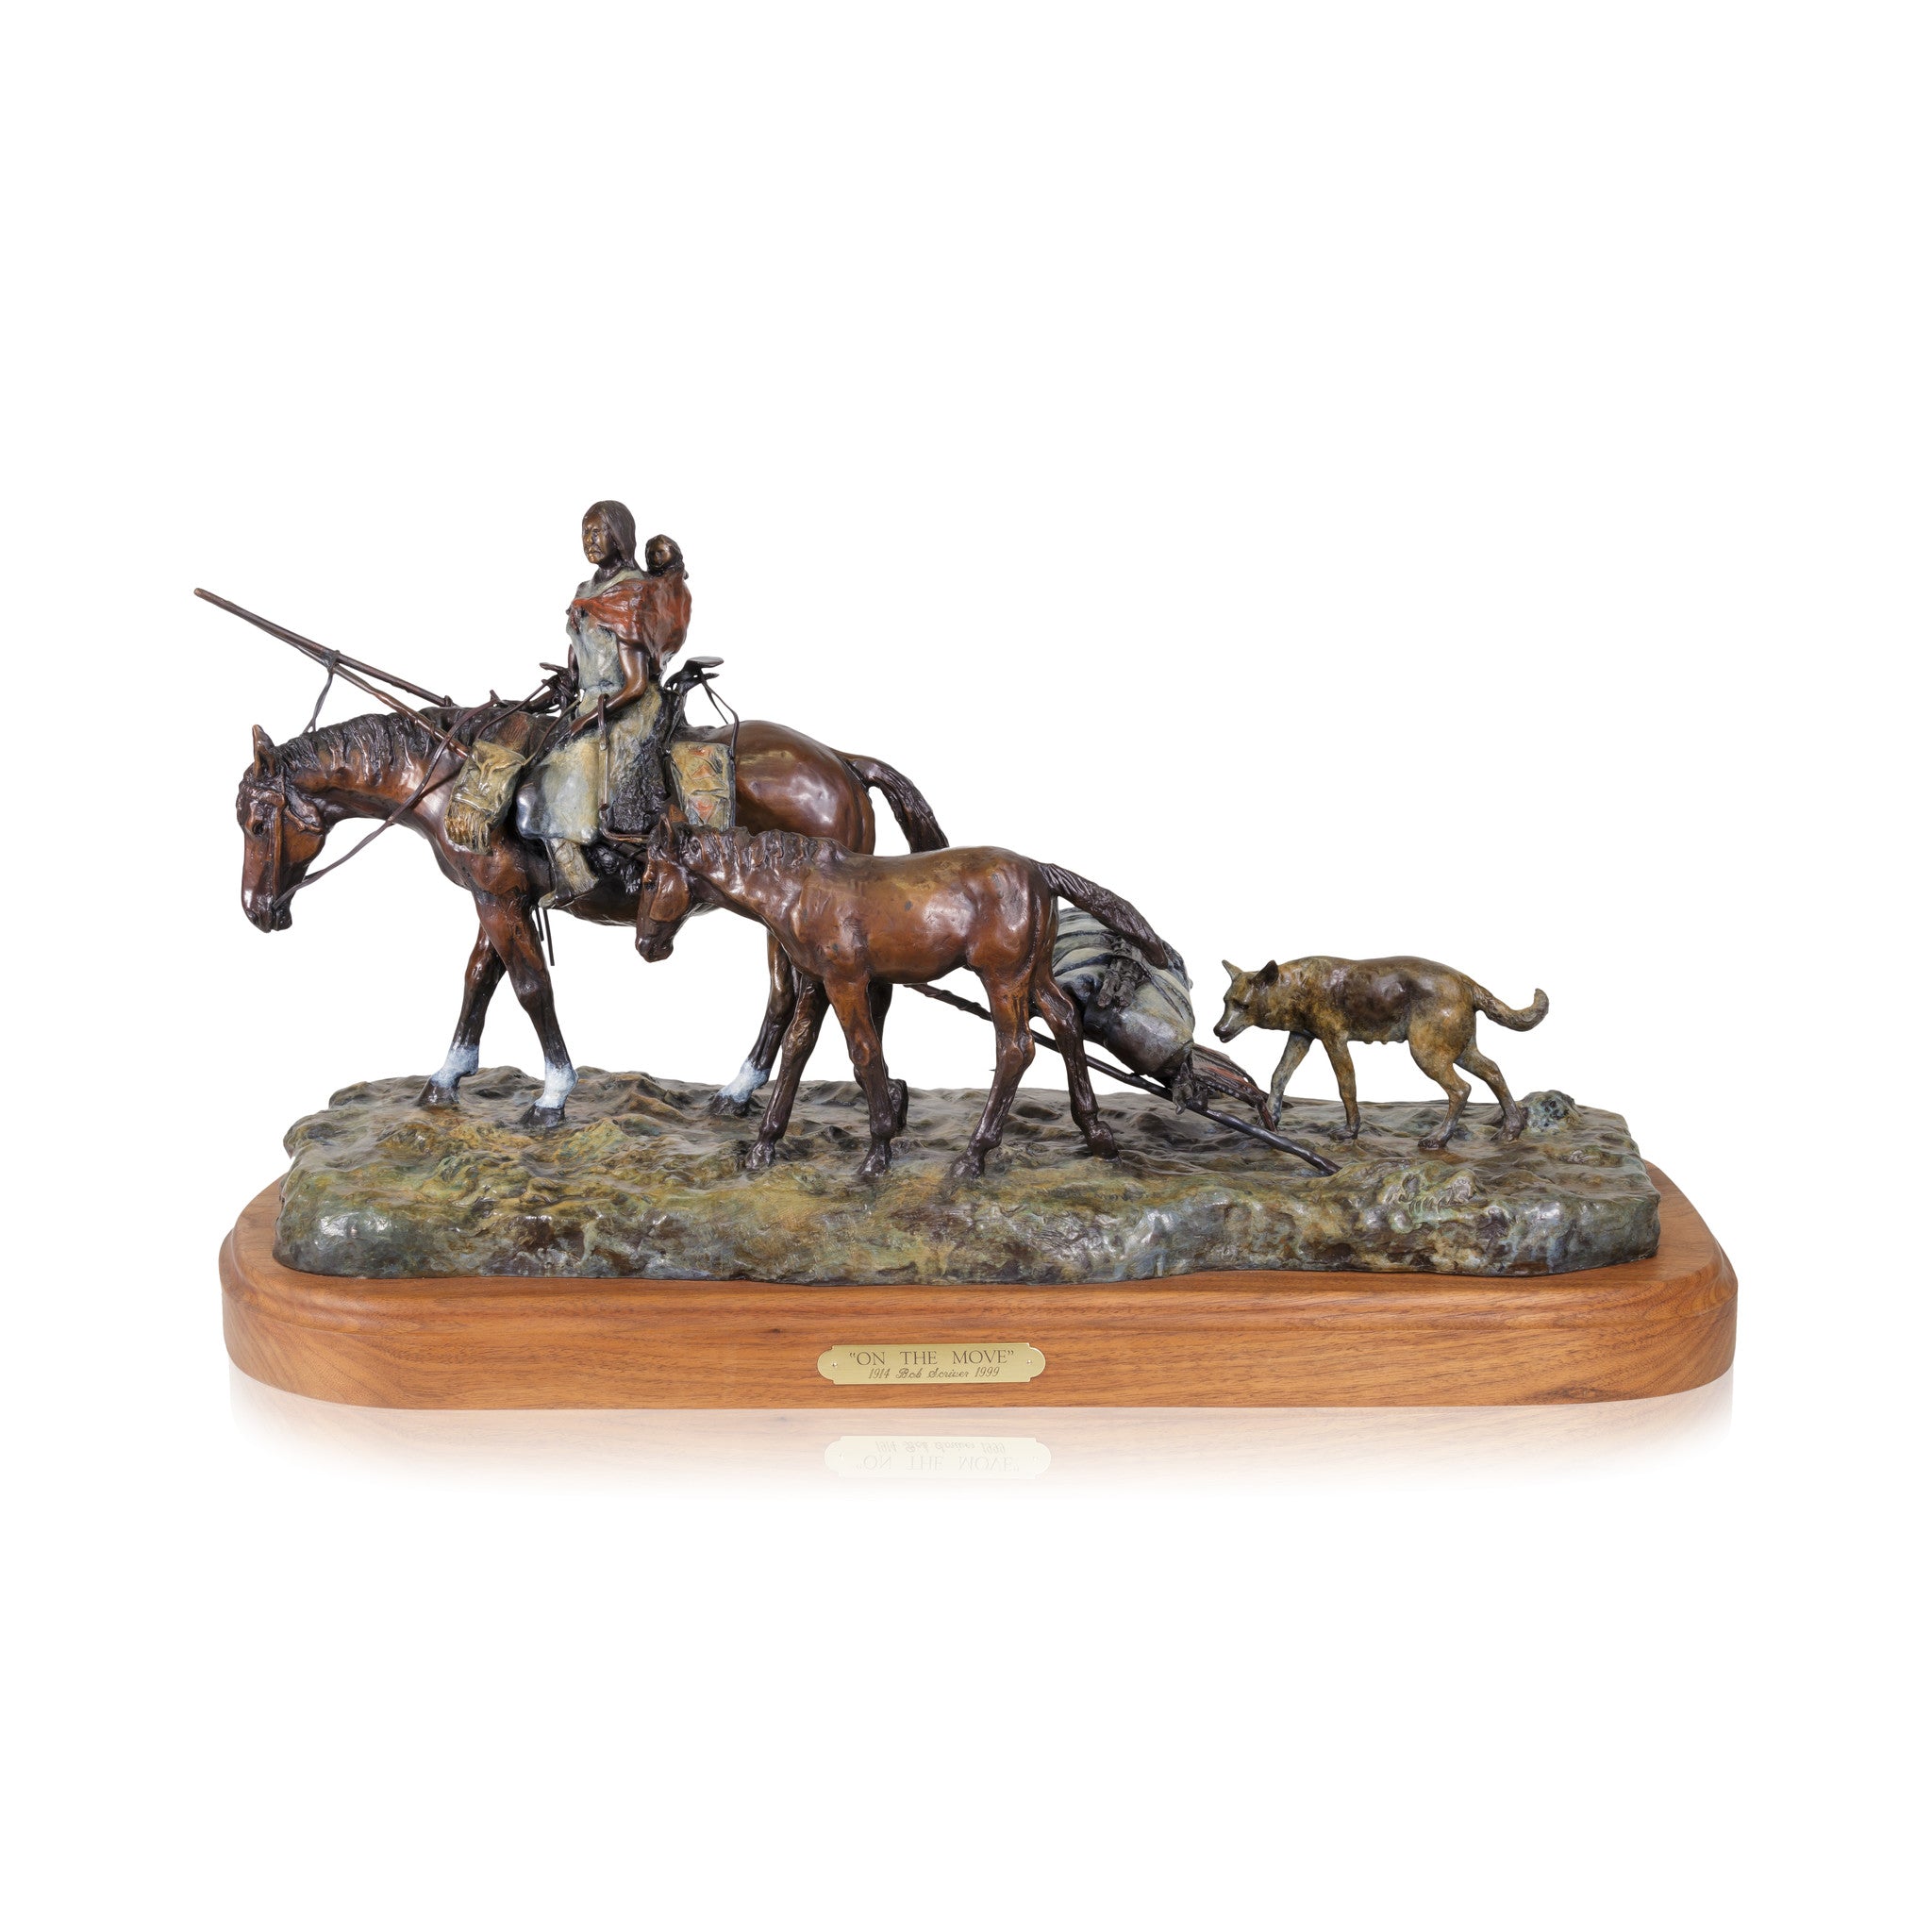 "On the Move" Bronze by Robert Scriver, Fine Art, Bronze, Limited